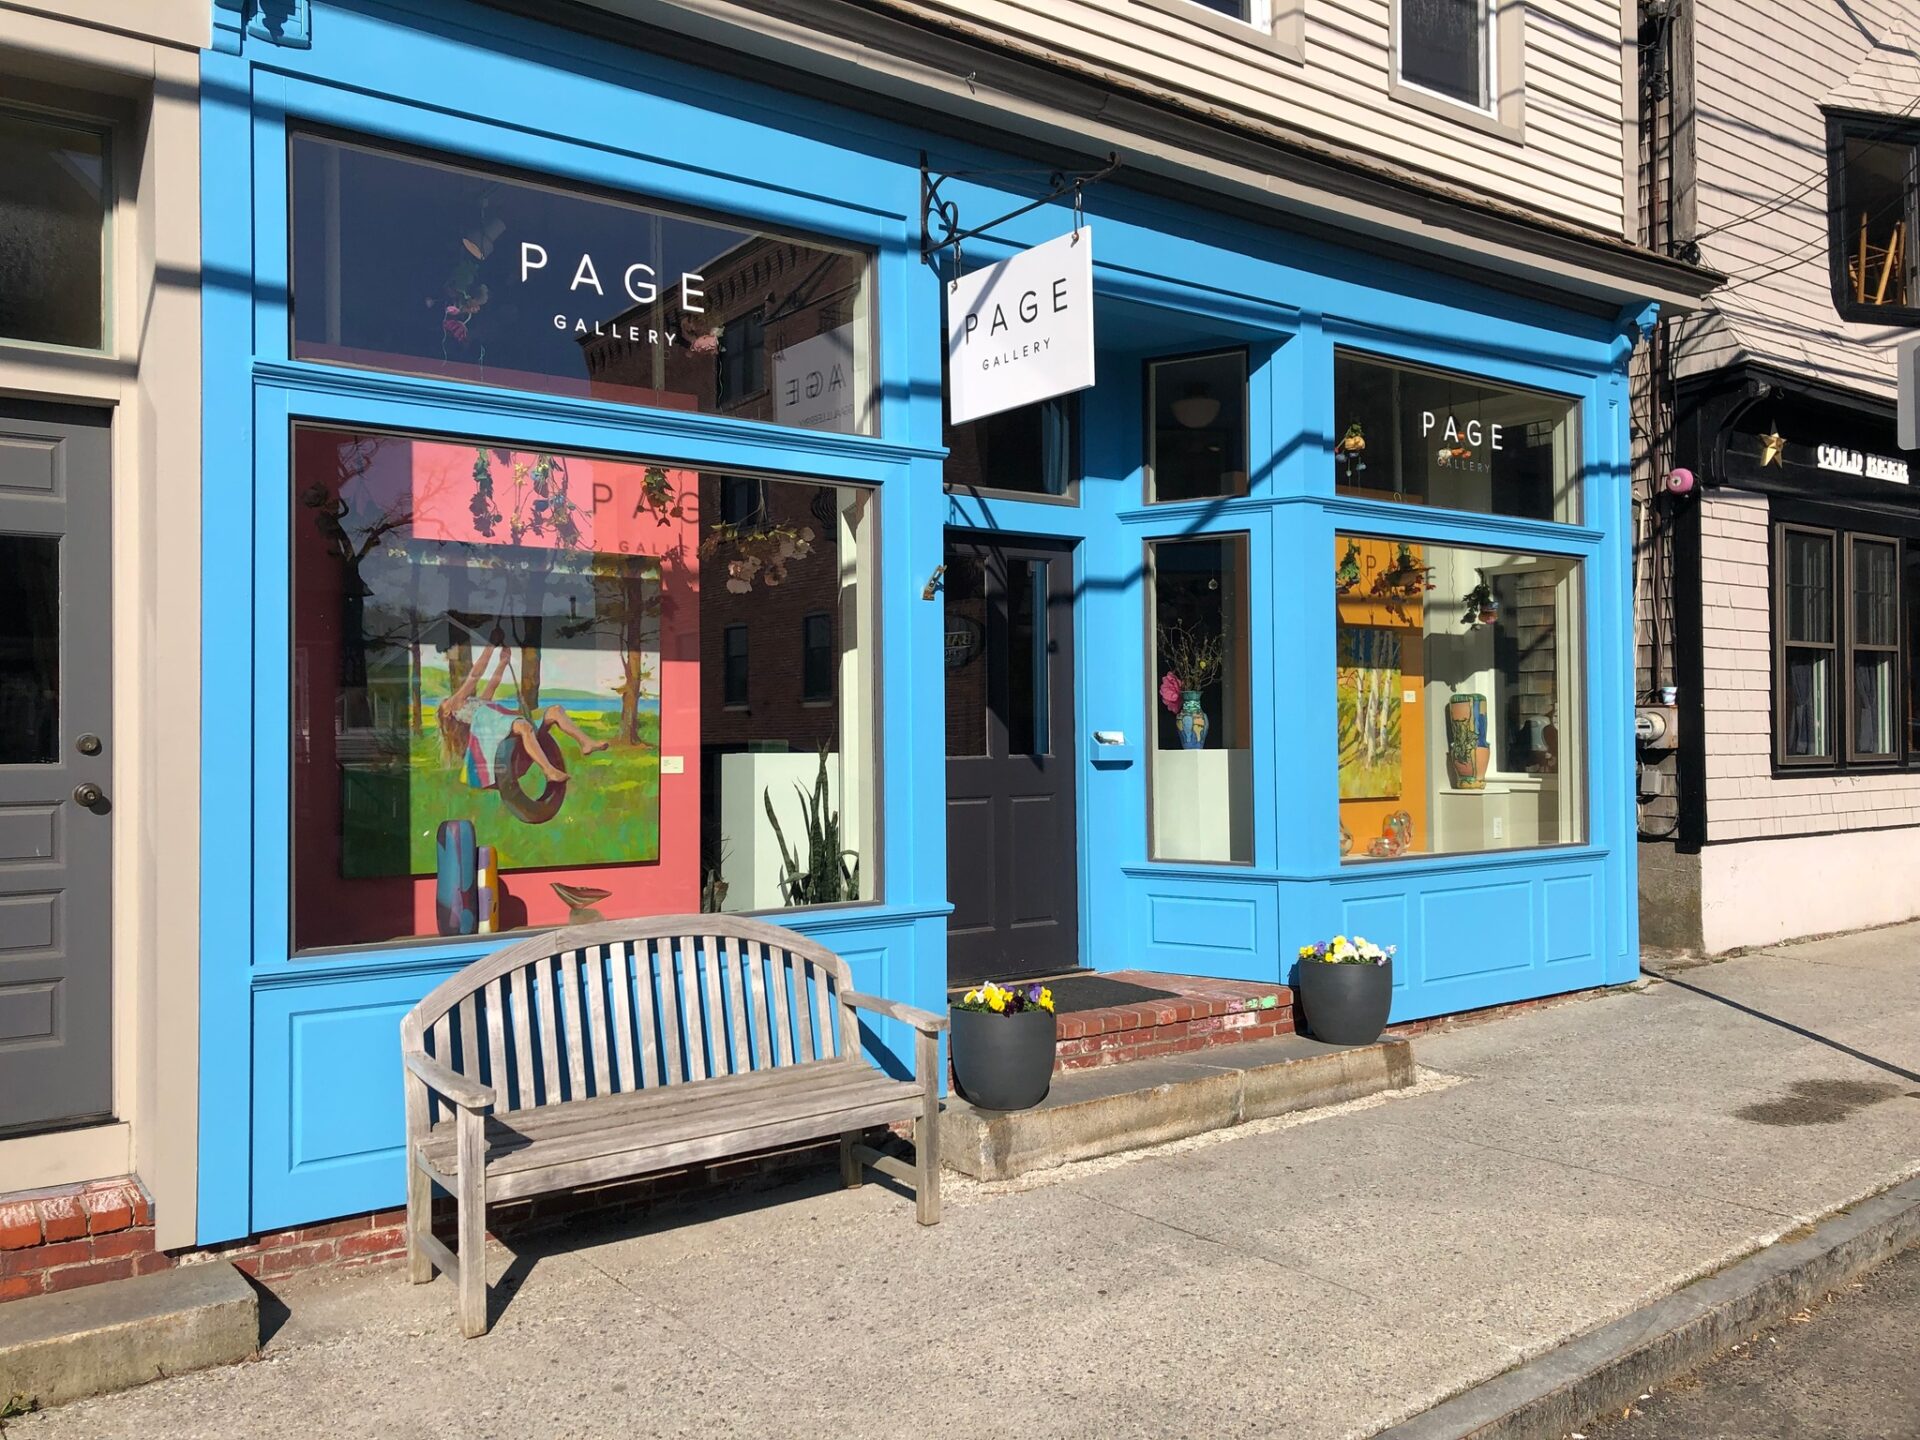 Exterior of Page Gallery